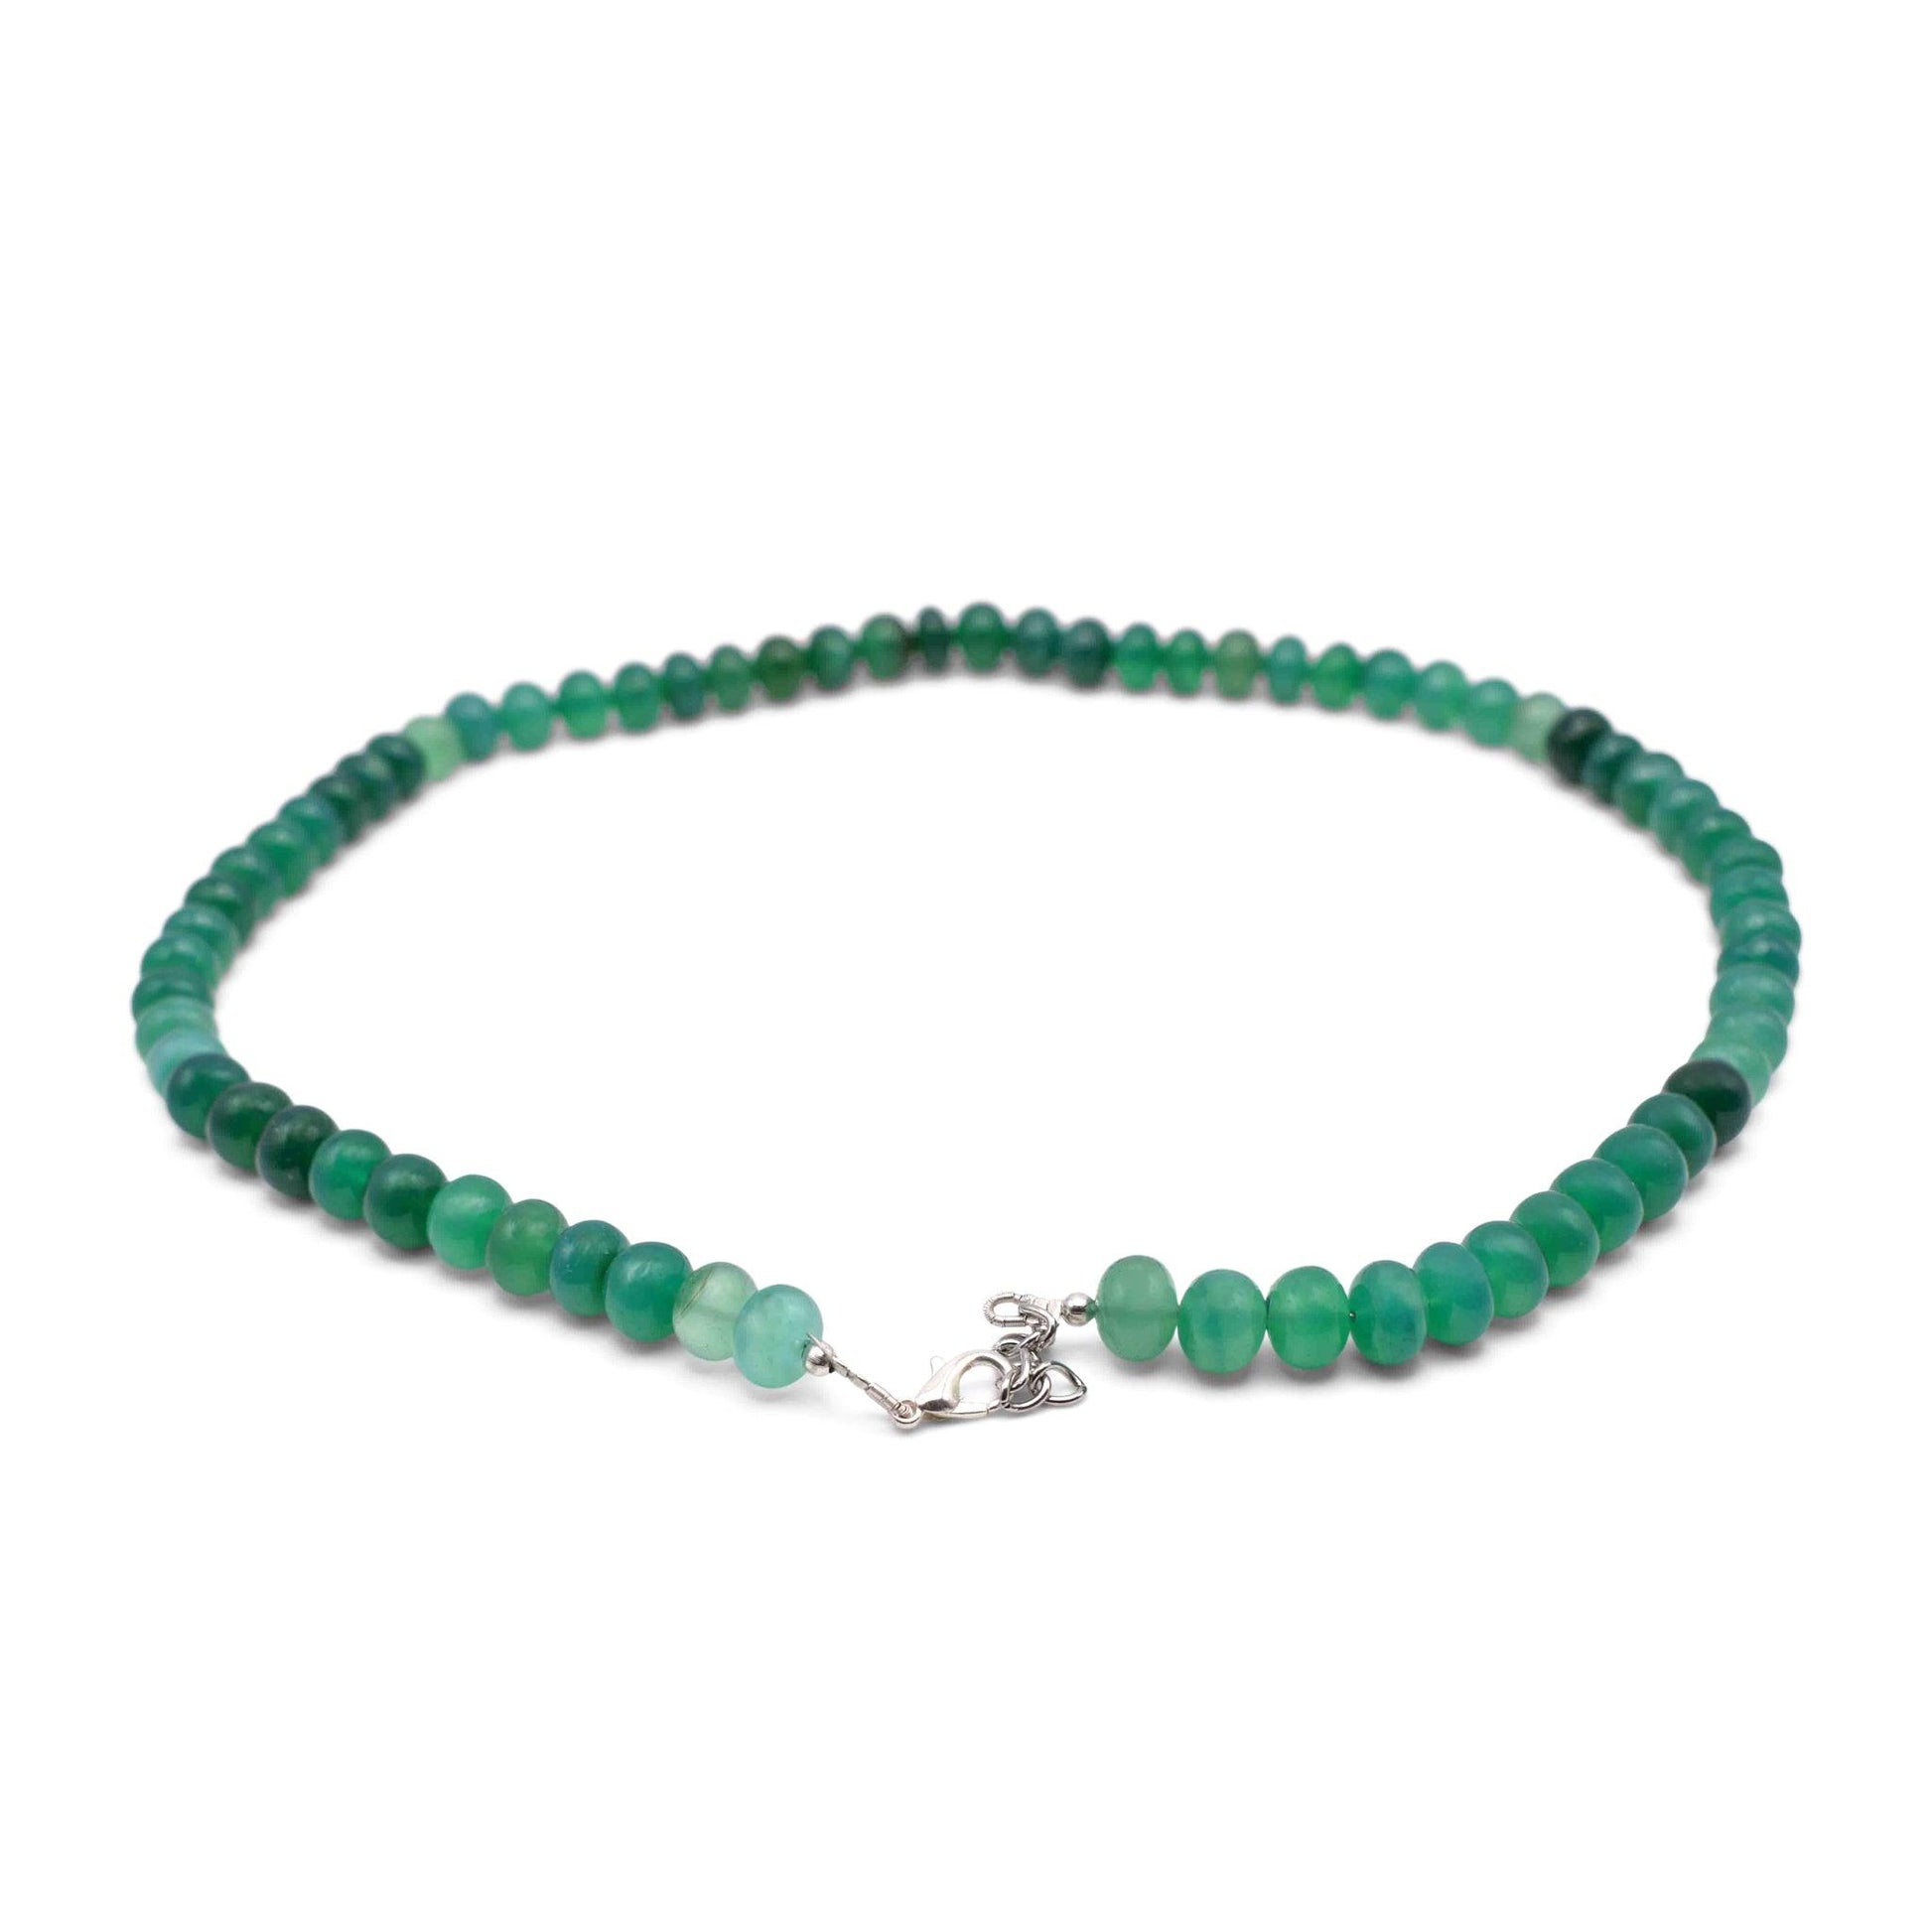 Green Onyx Faceted Cut Stone Necklace - Mystic Gleam